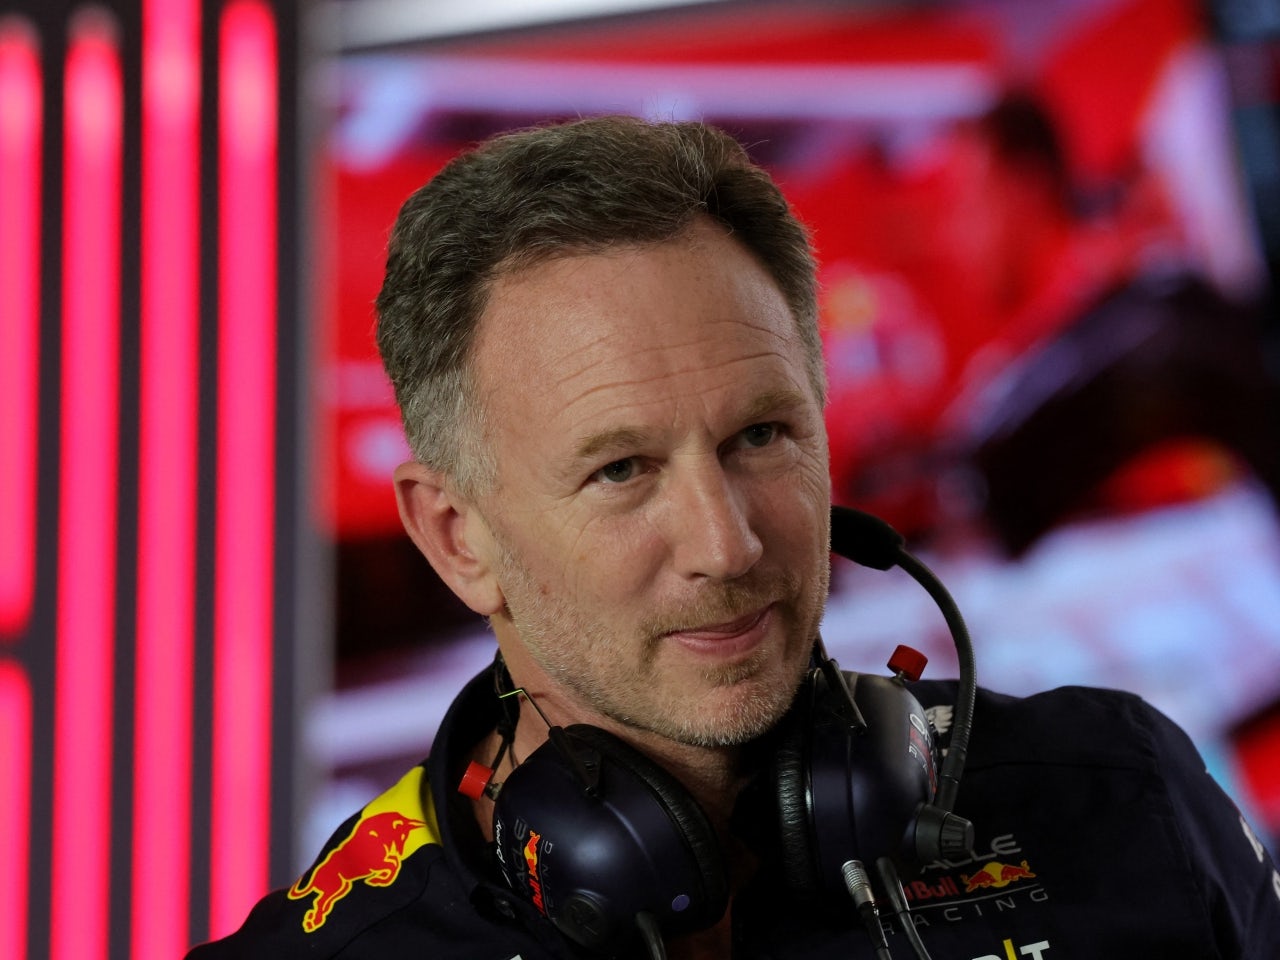 Concorde talks proceeding as expected, says Horner